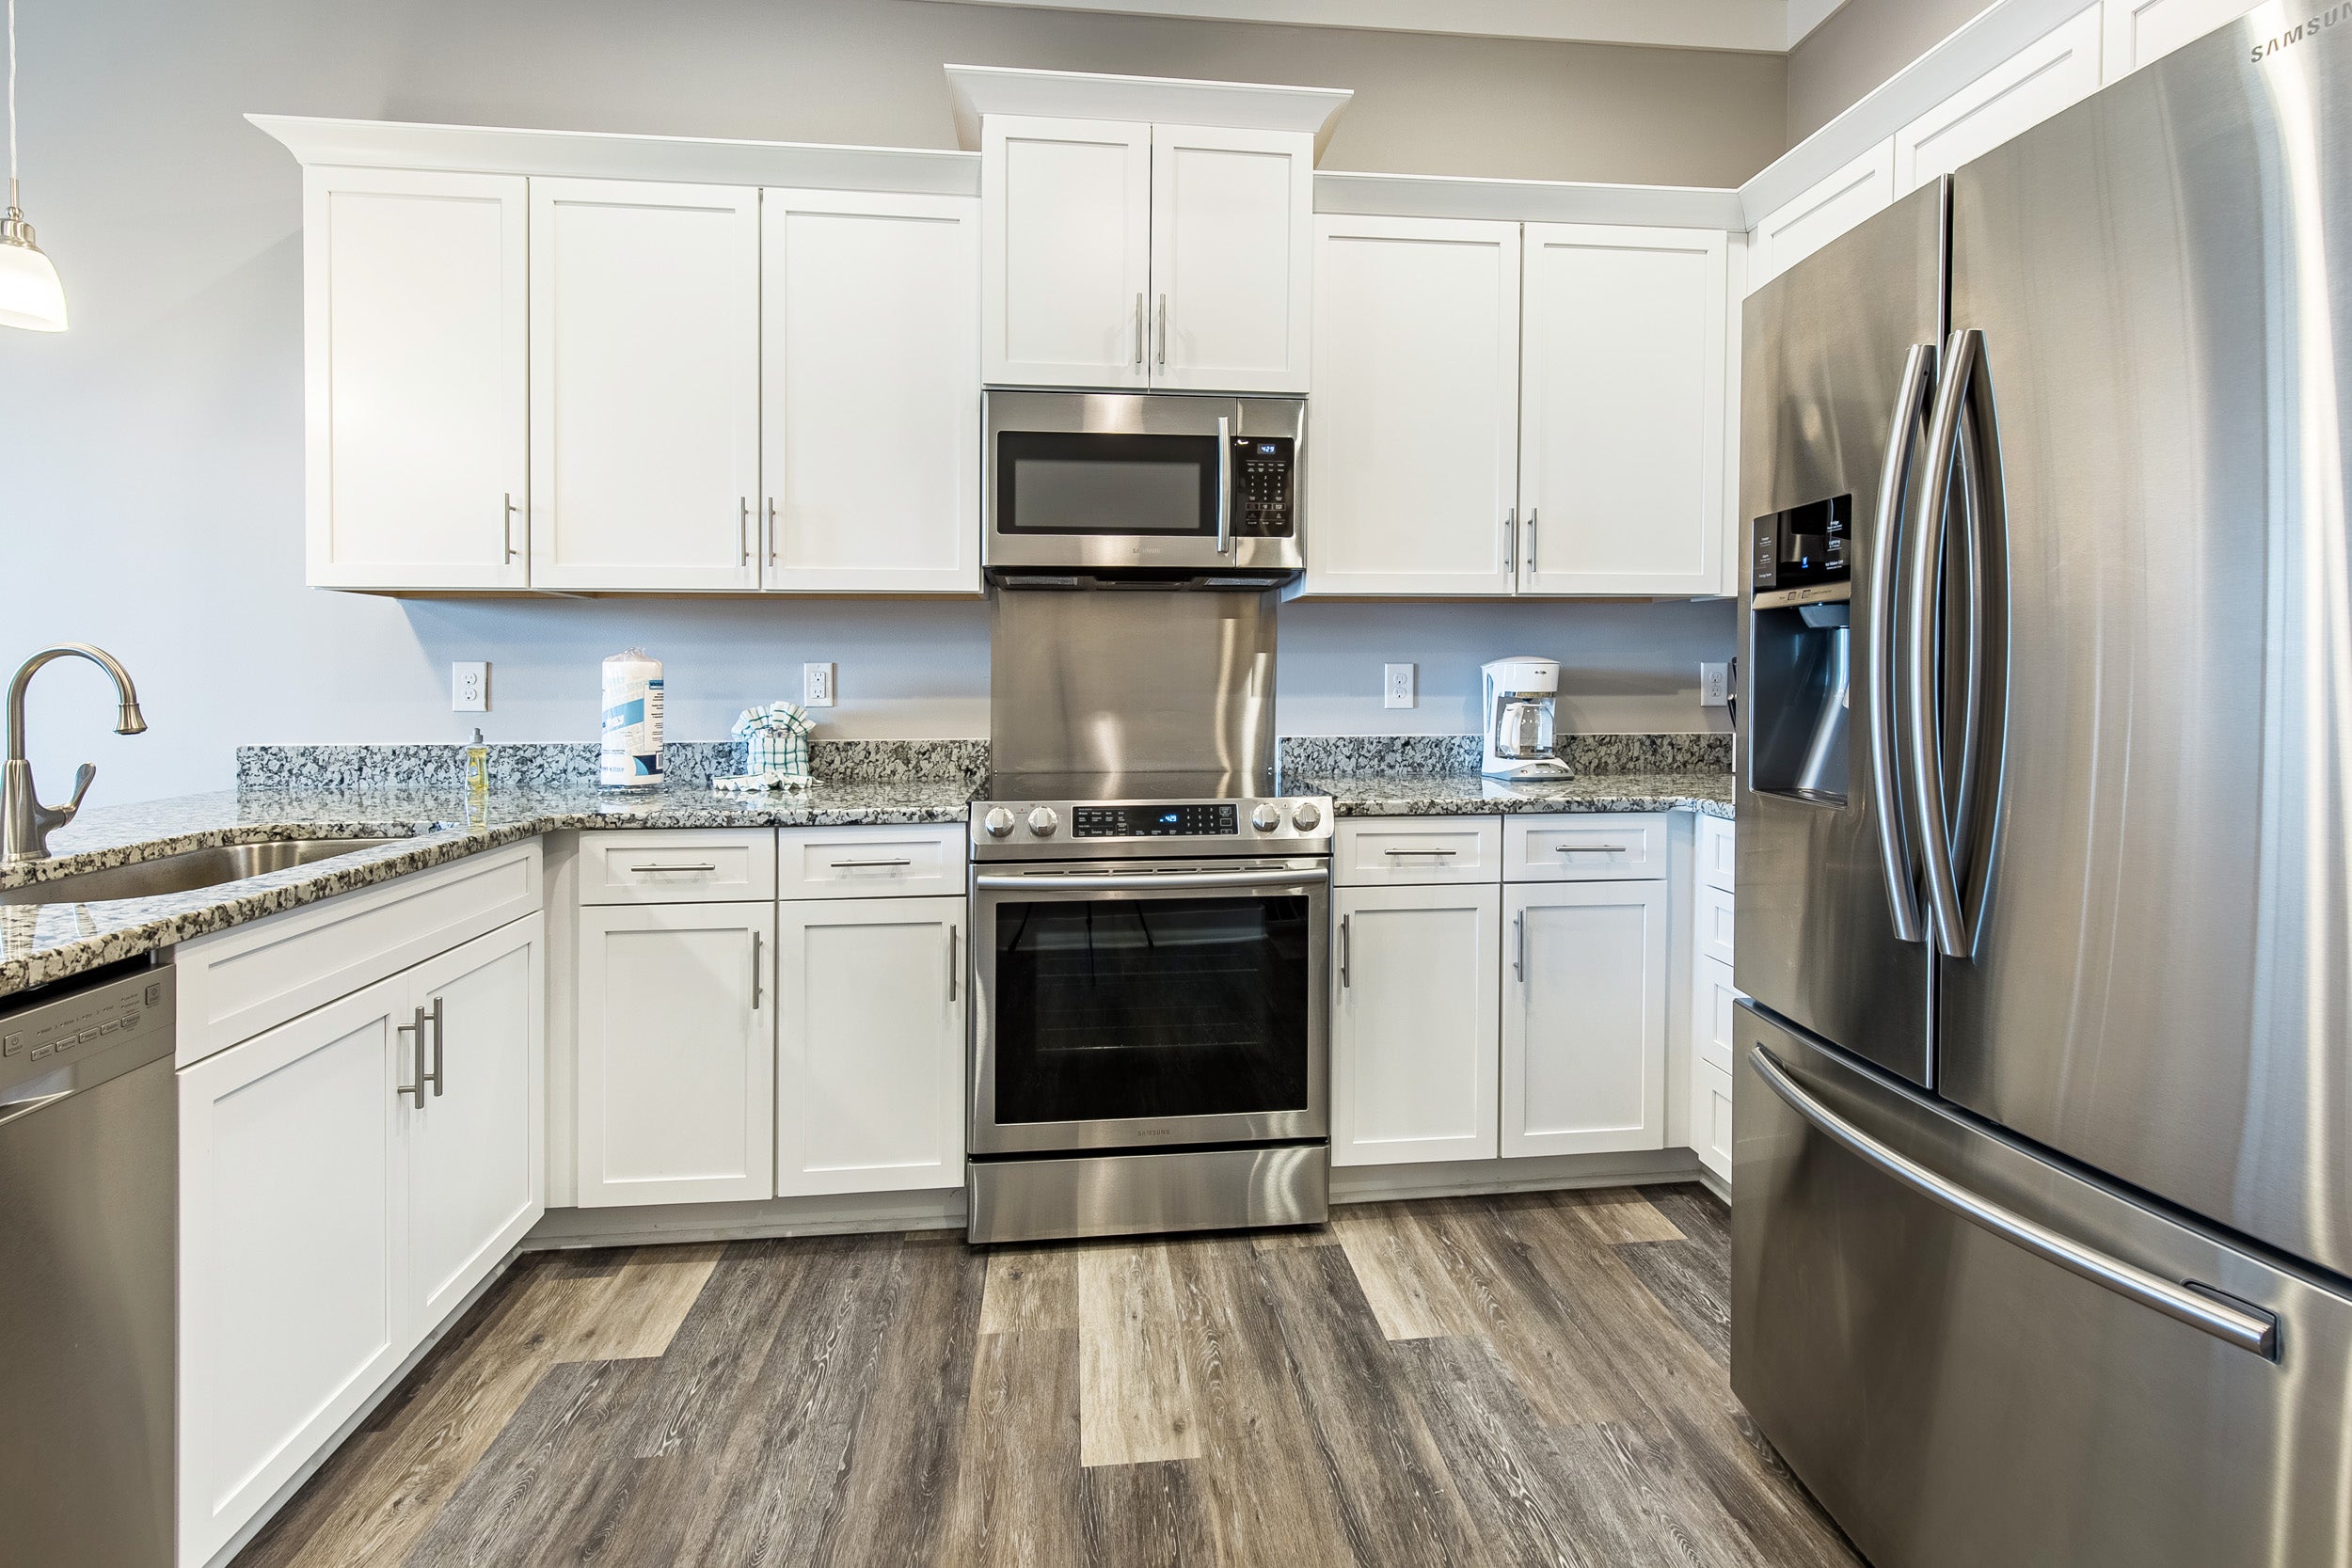 2nd floor kitchen has everything you need!